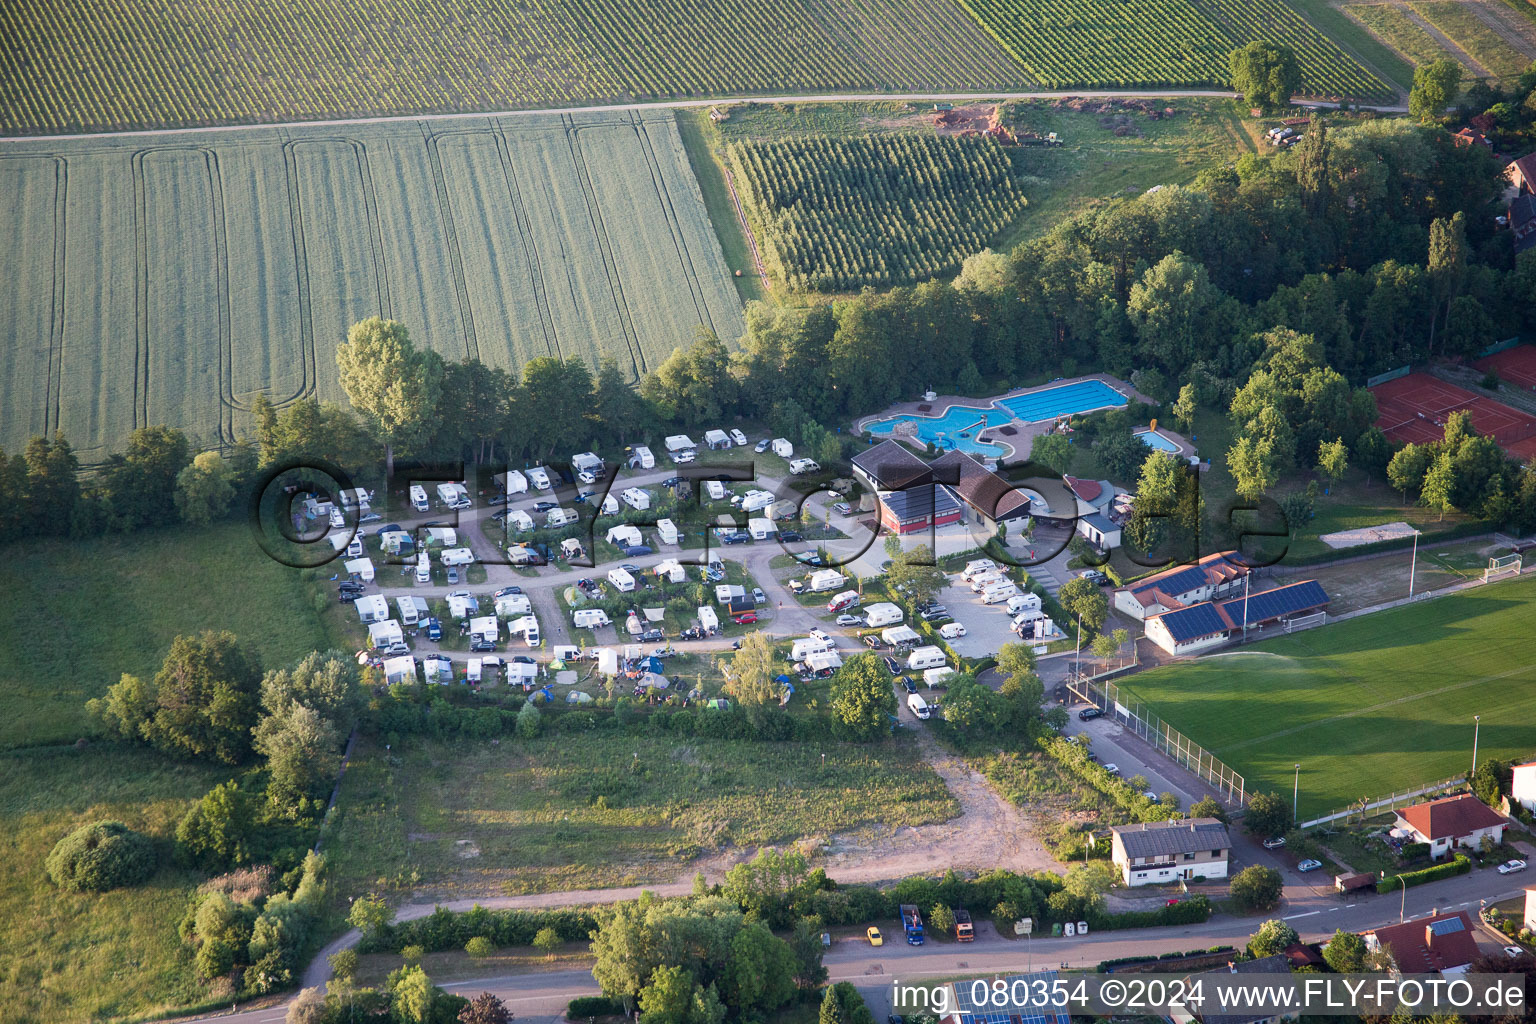 Oblique view of Camping with caravans and tents in the district Ingenheim in Billigheim-Ingenheim in the state Rhineland-Palatinate